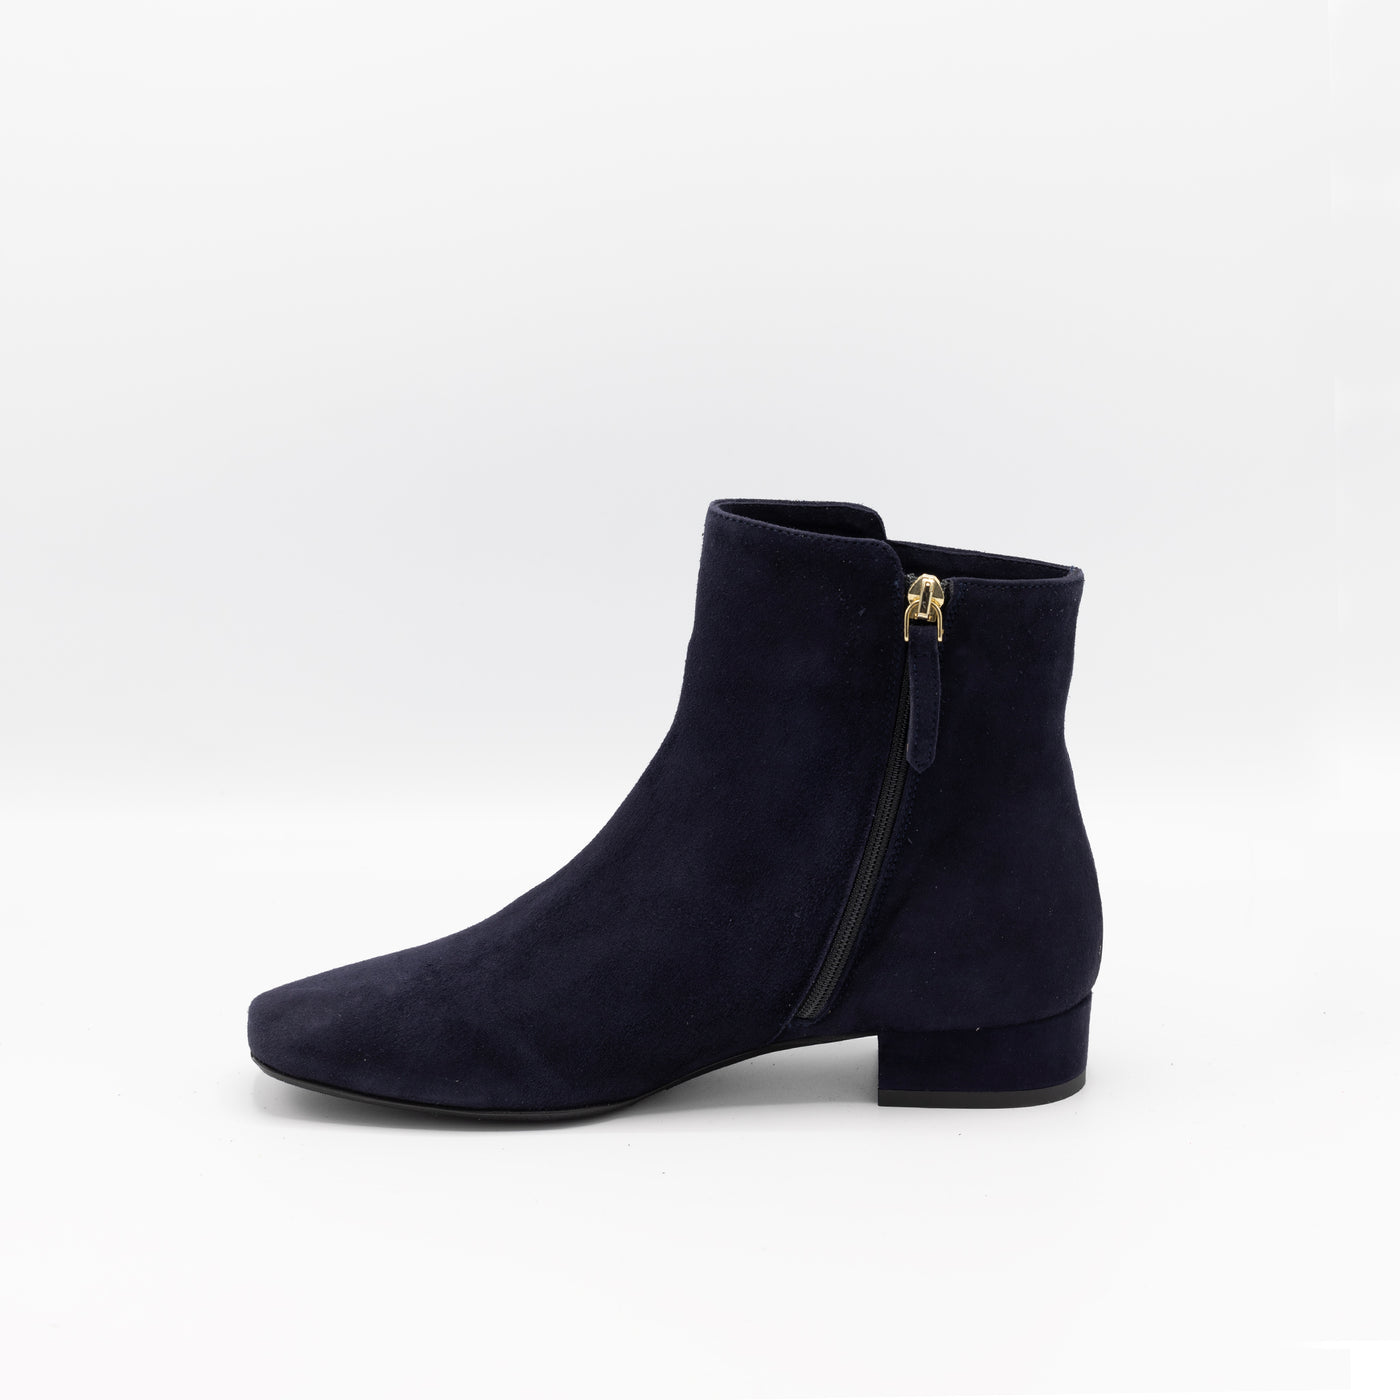 navy blue suede ankle boots with zipper